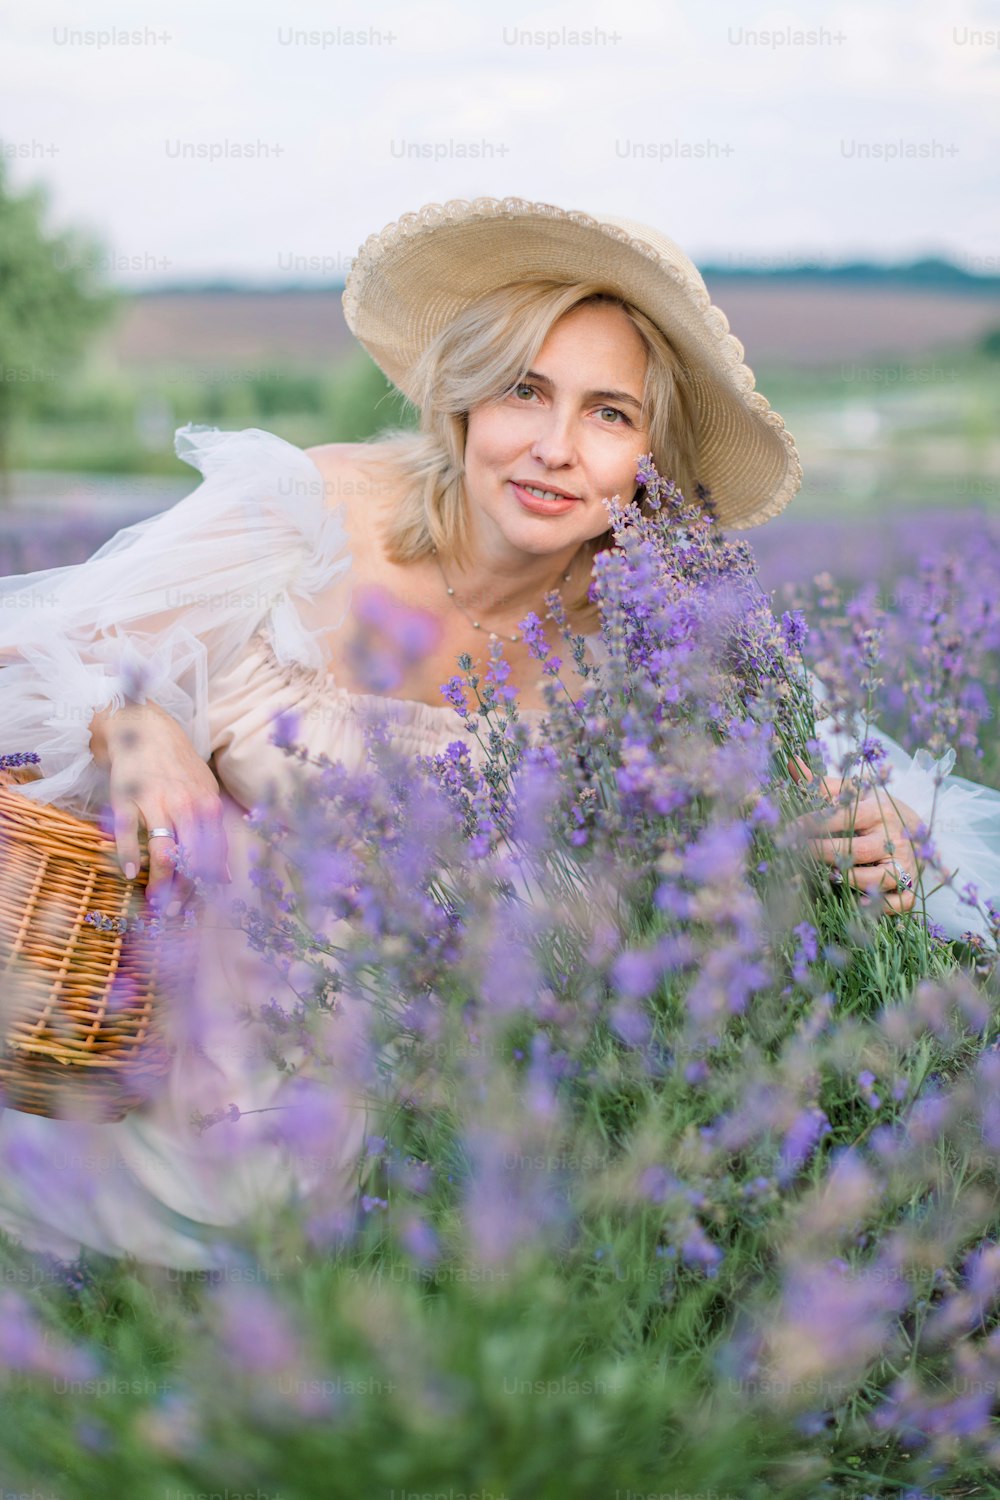 Beautiful mature blond lady in lavender field. Smiling attractive middle aged woman in white dress and hat posing in a lavender field with small wicker basket